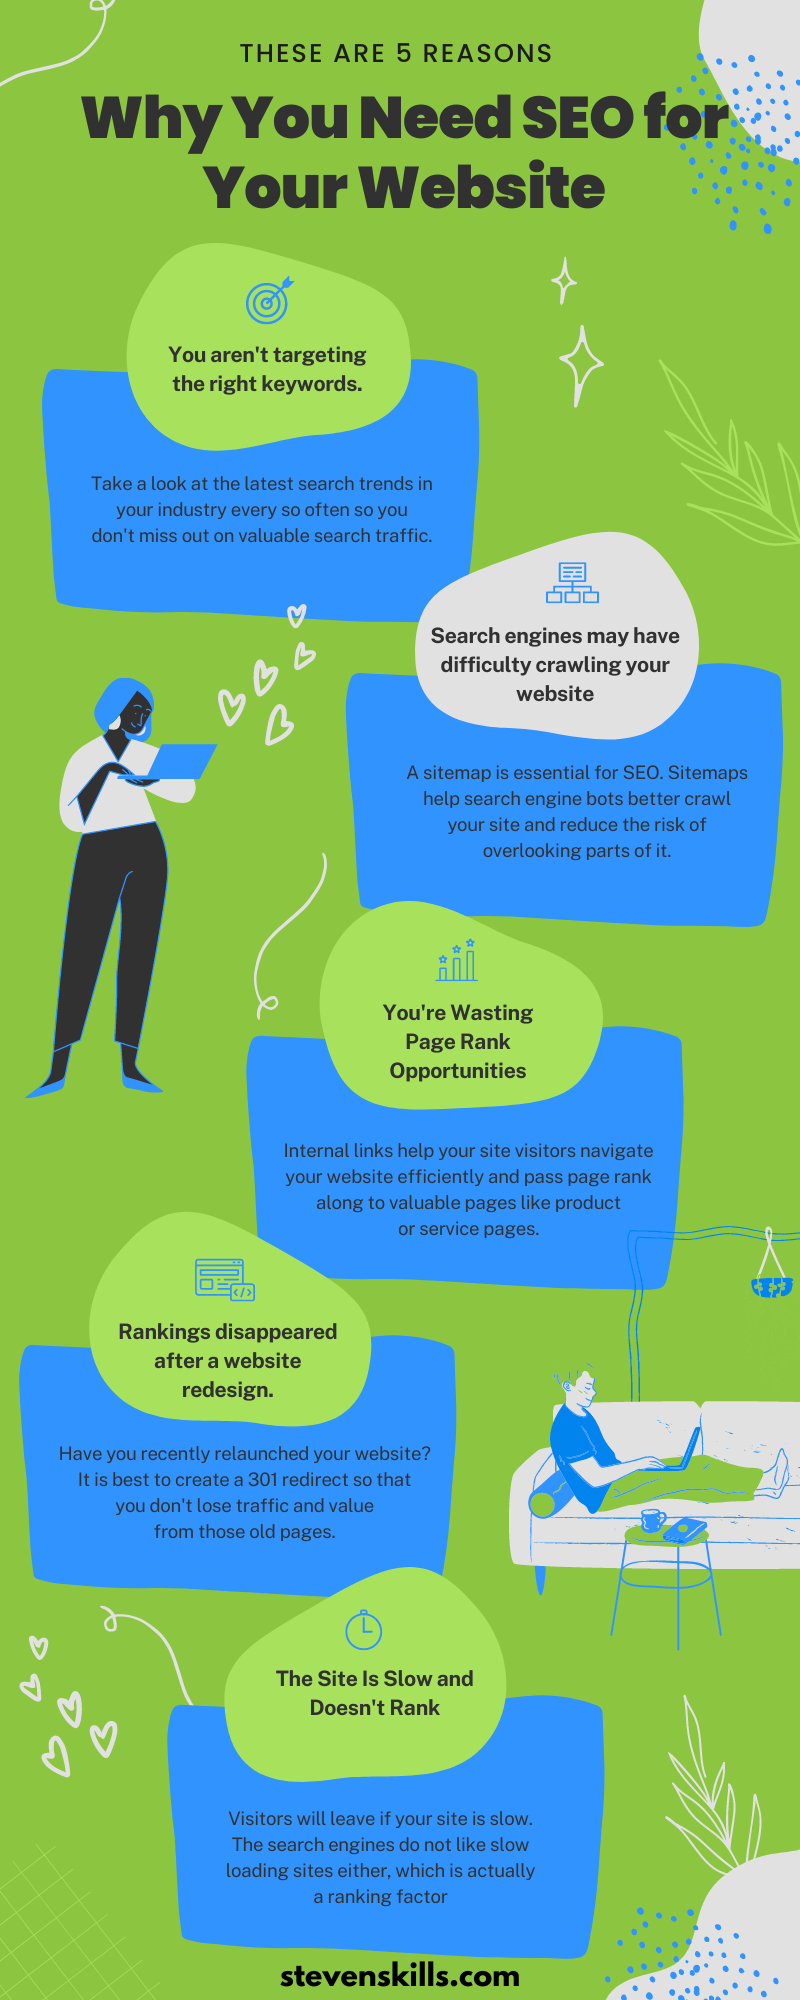 Infographic Example: Why You Need SEO for Your Website